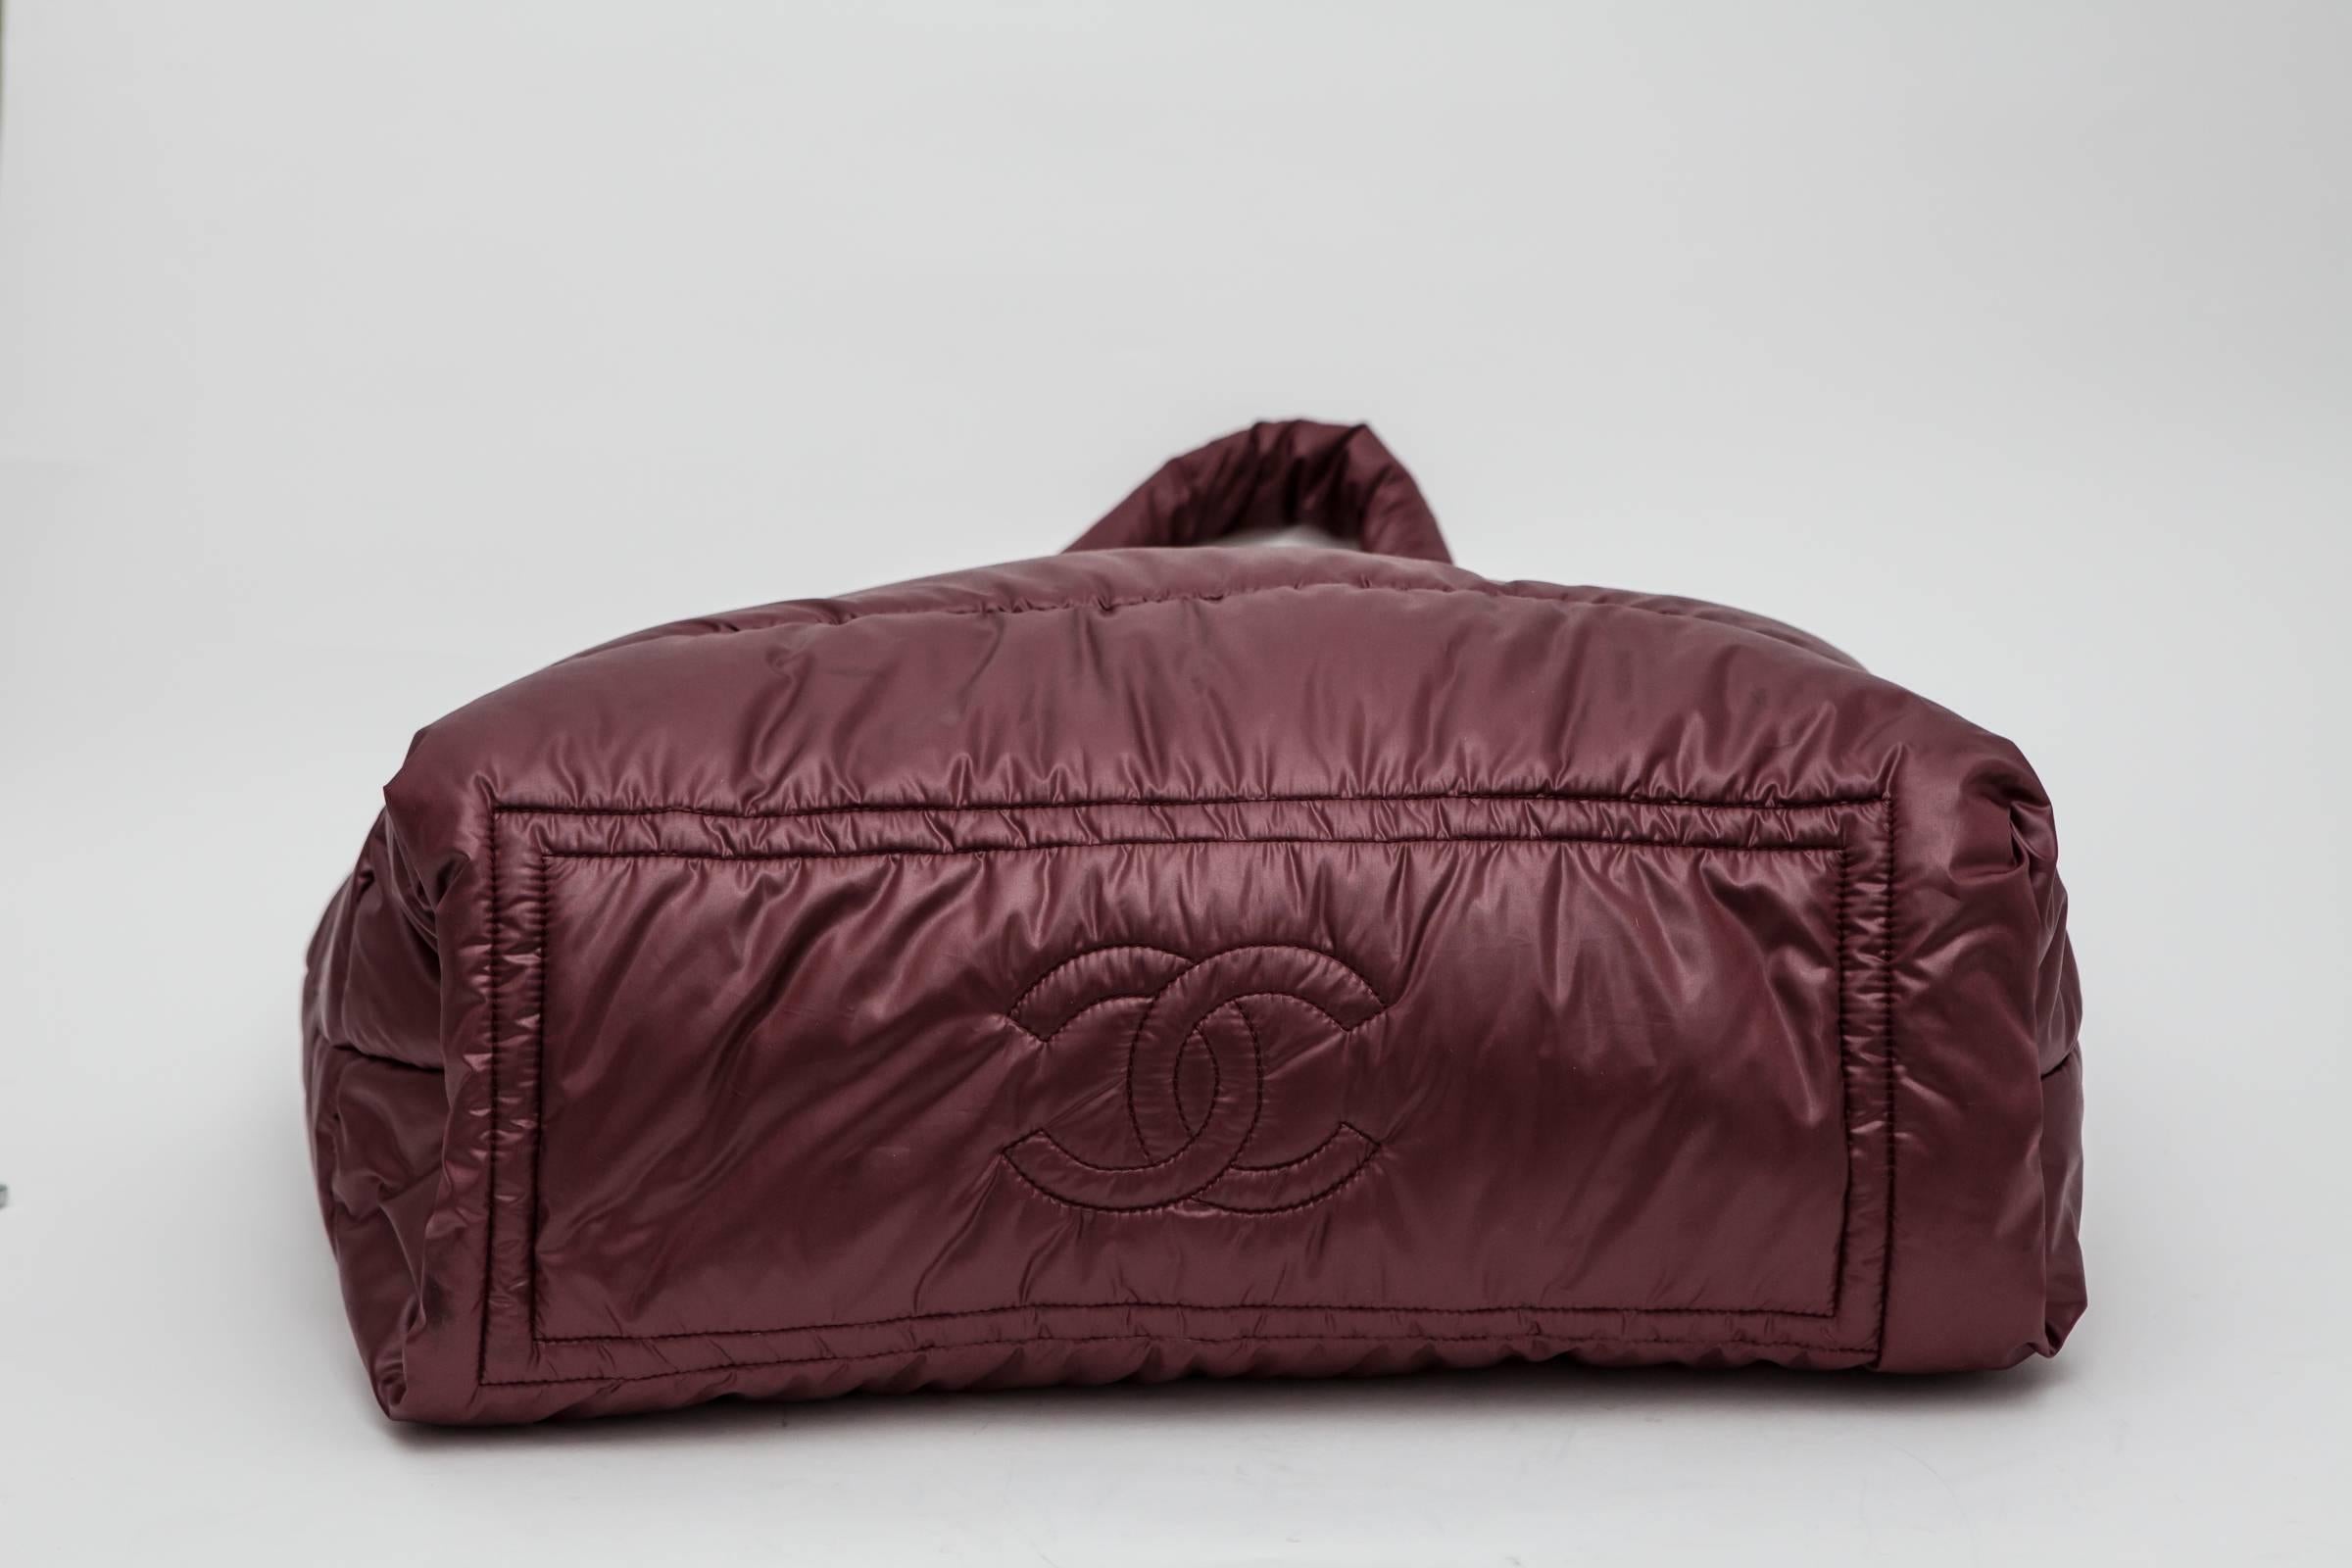 Burgundy weekender bag with double top handle and black quilted interior.
ID: 12758008

*Slight stains on bottom and sides*